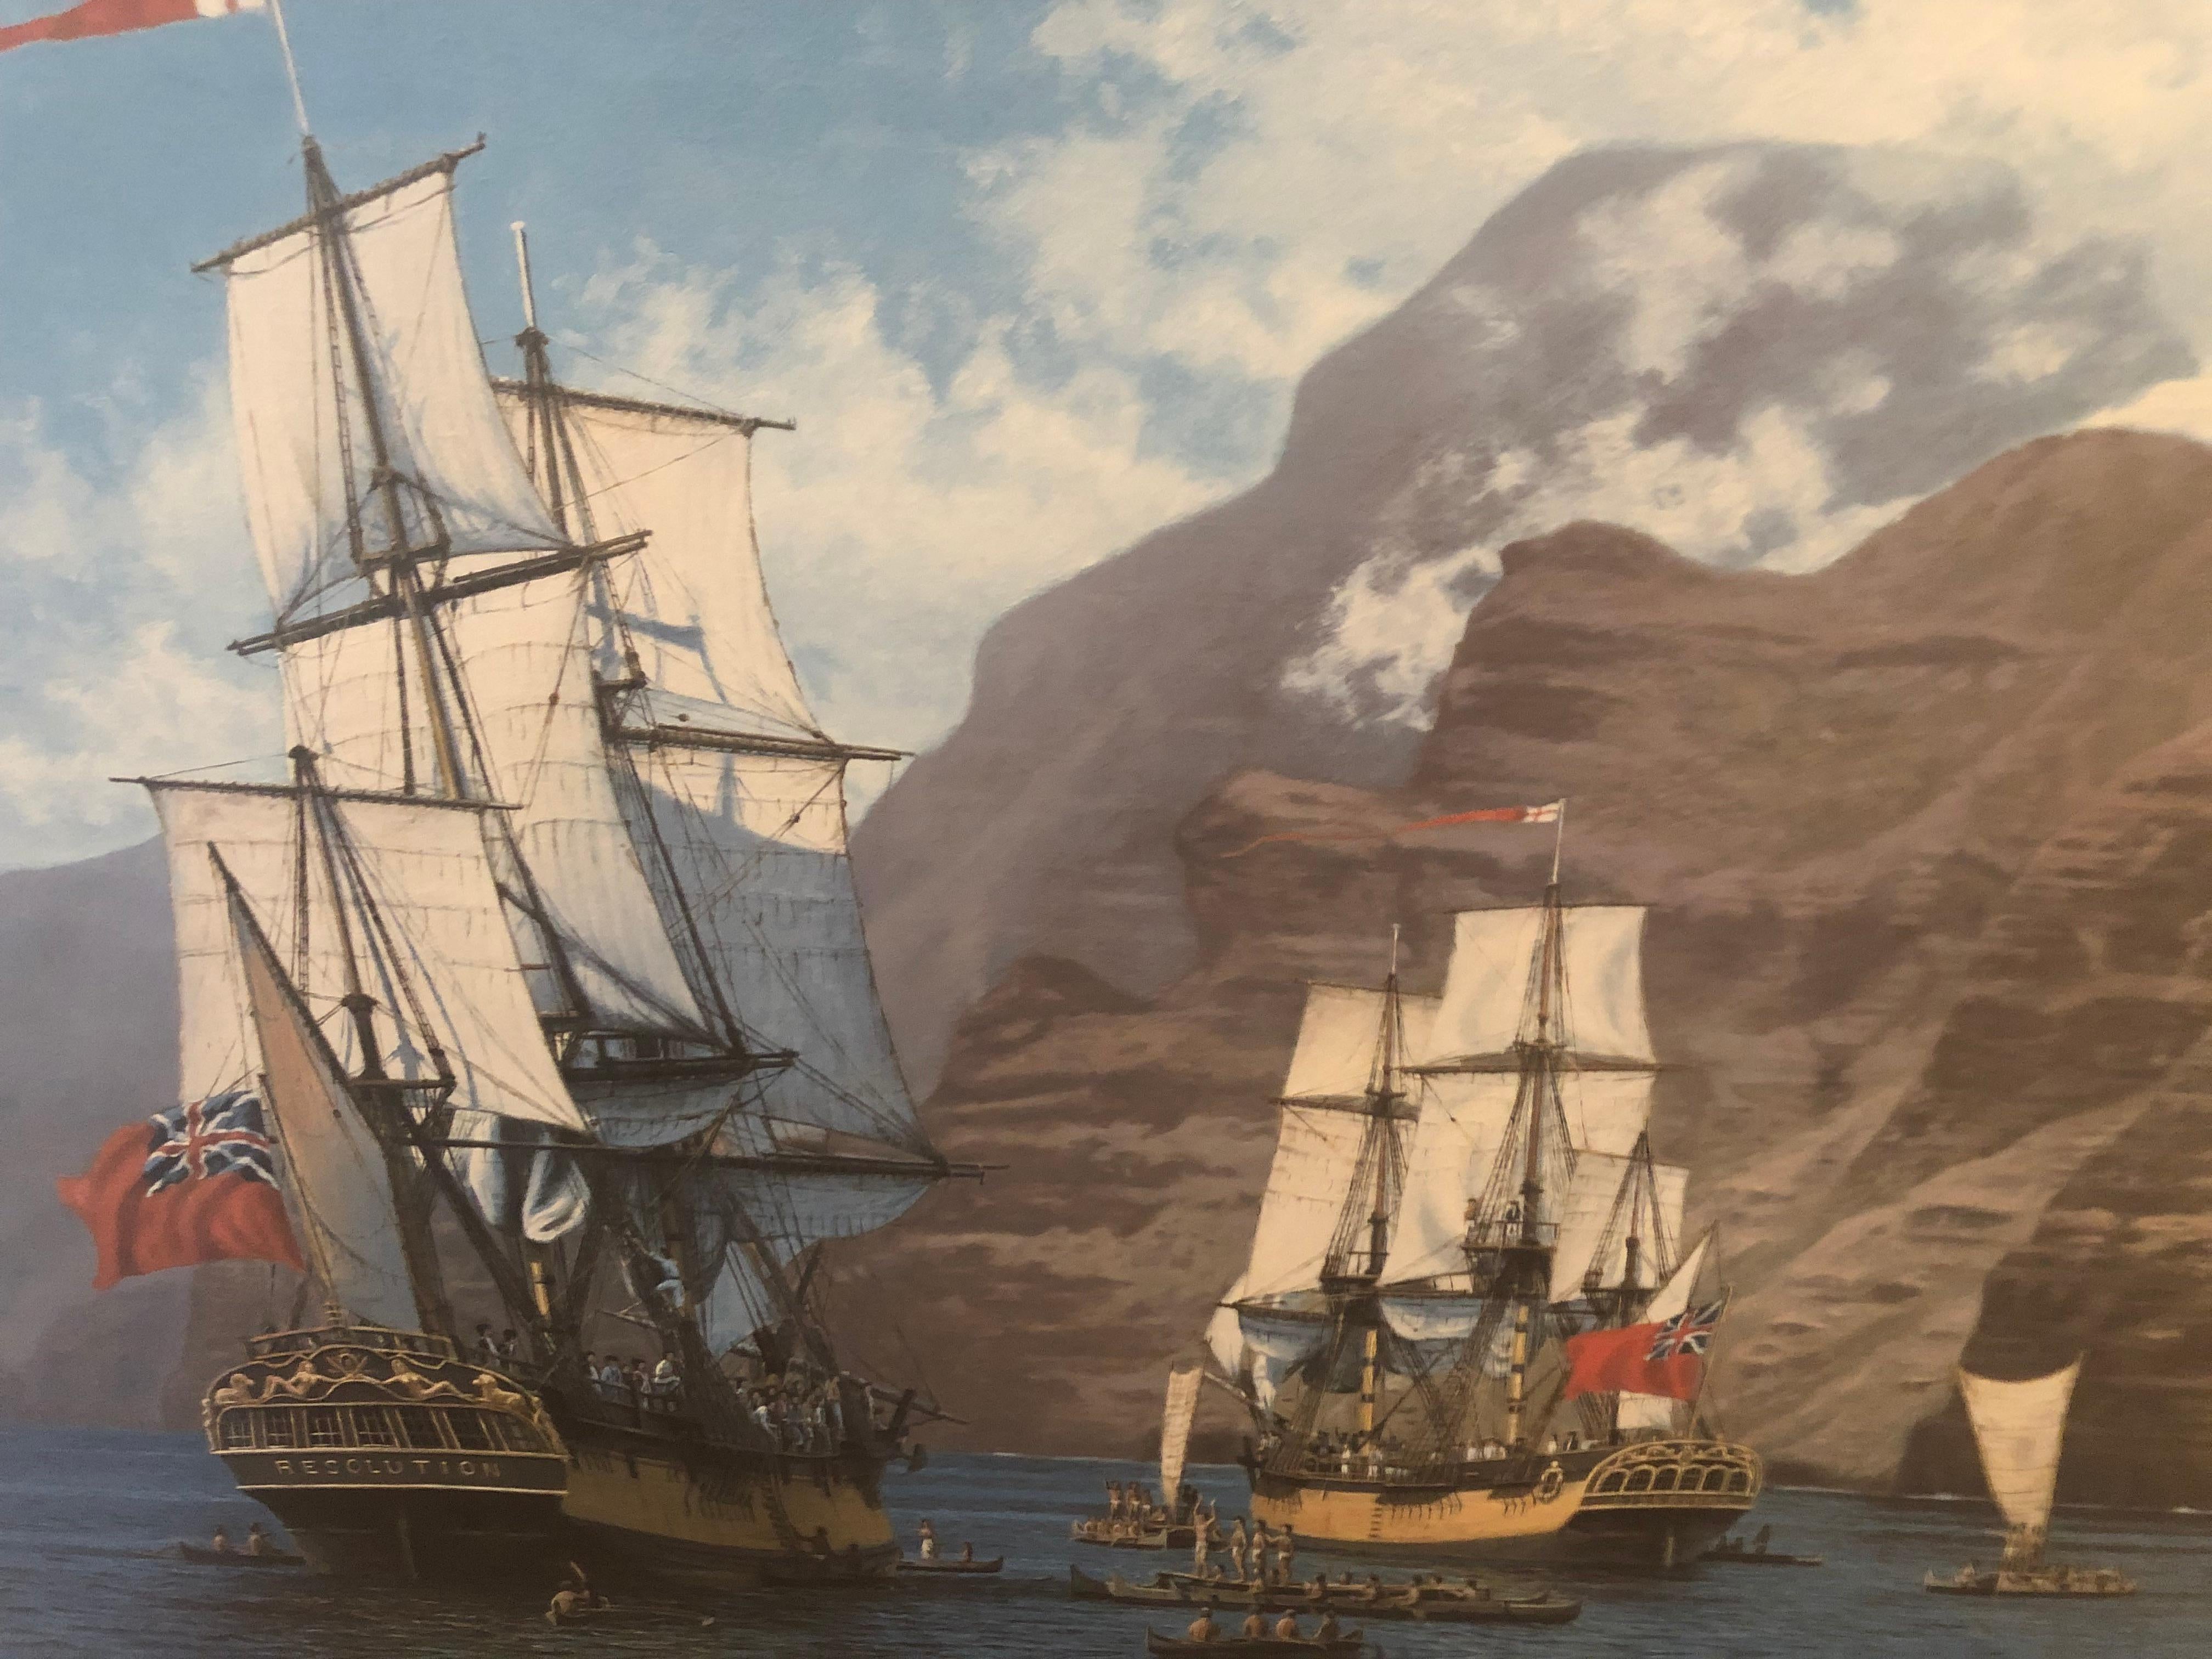 Very large impressive nautical scene by listed nautical artist Raymond Massey.
Comes with certificate of edition from Ship Store Galleries in Hawaii
Limited edition signed numbered 171/ 250
Raymond Massey lithograph titled Captain Cook's